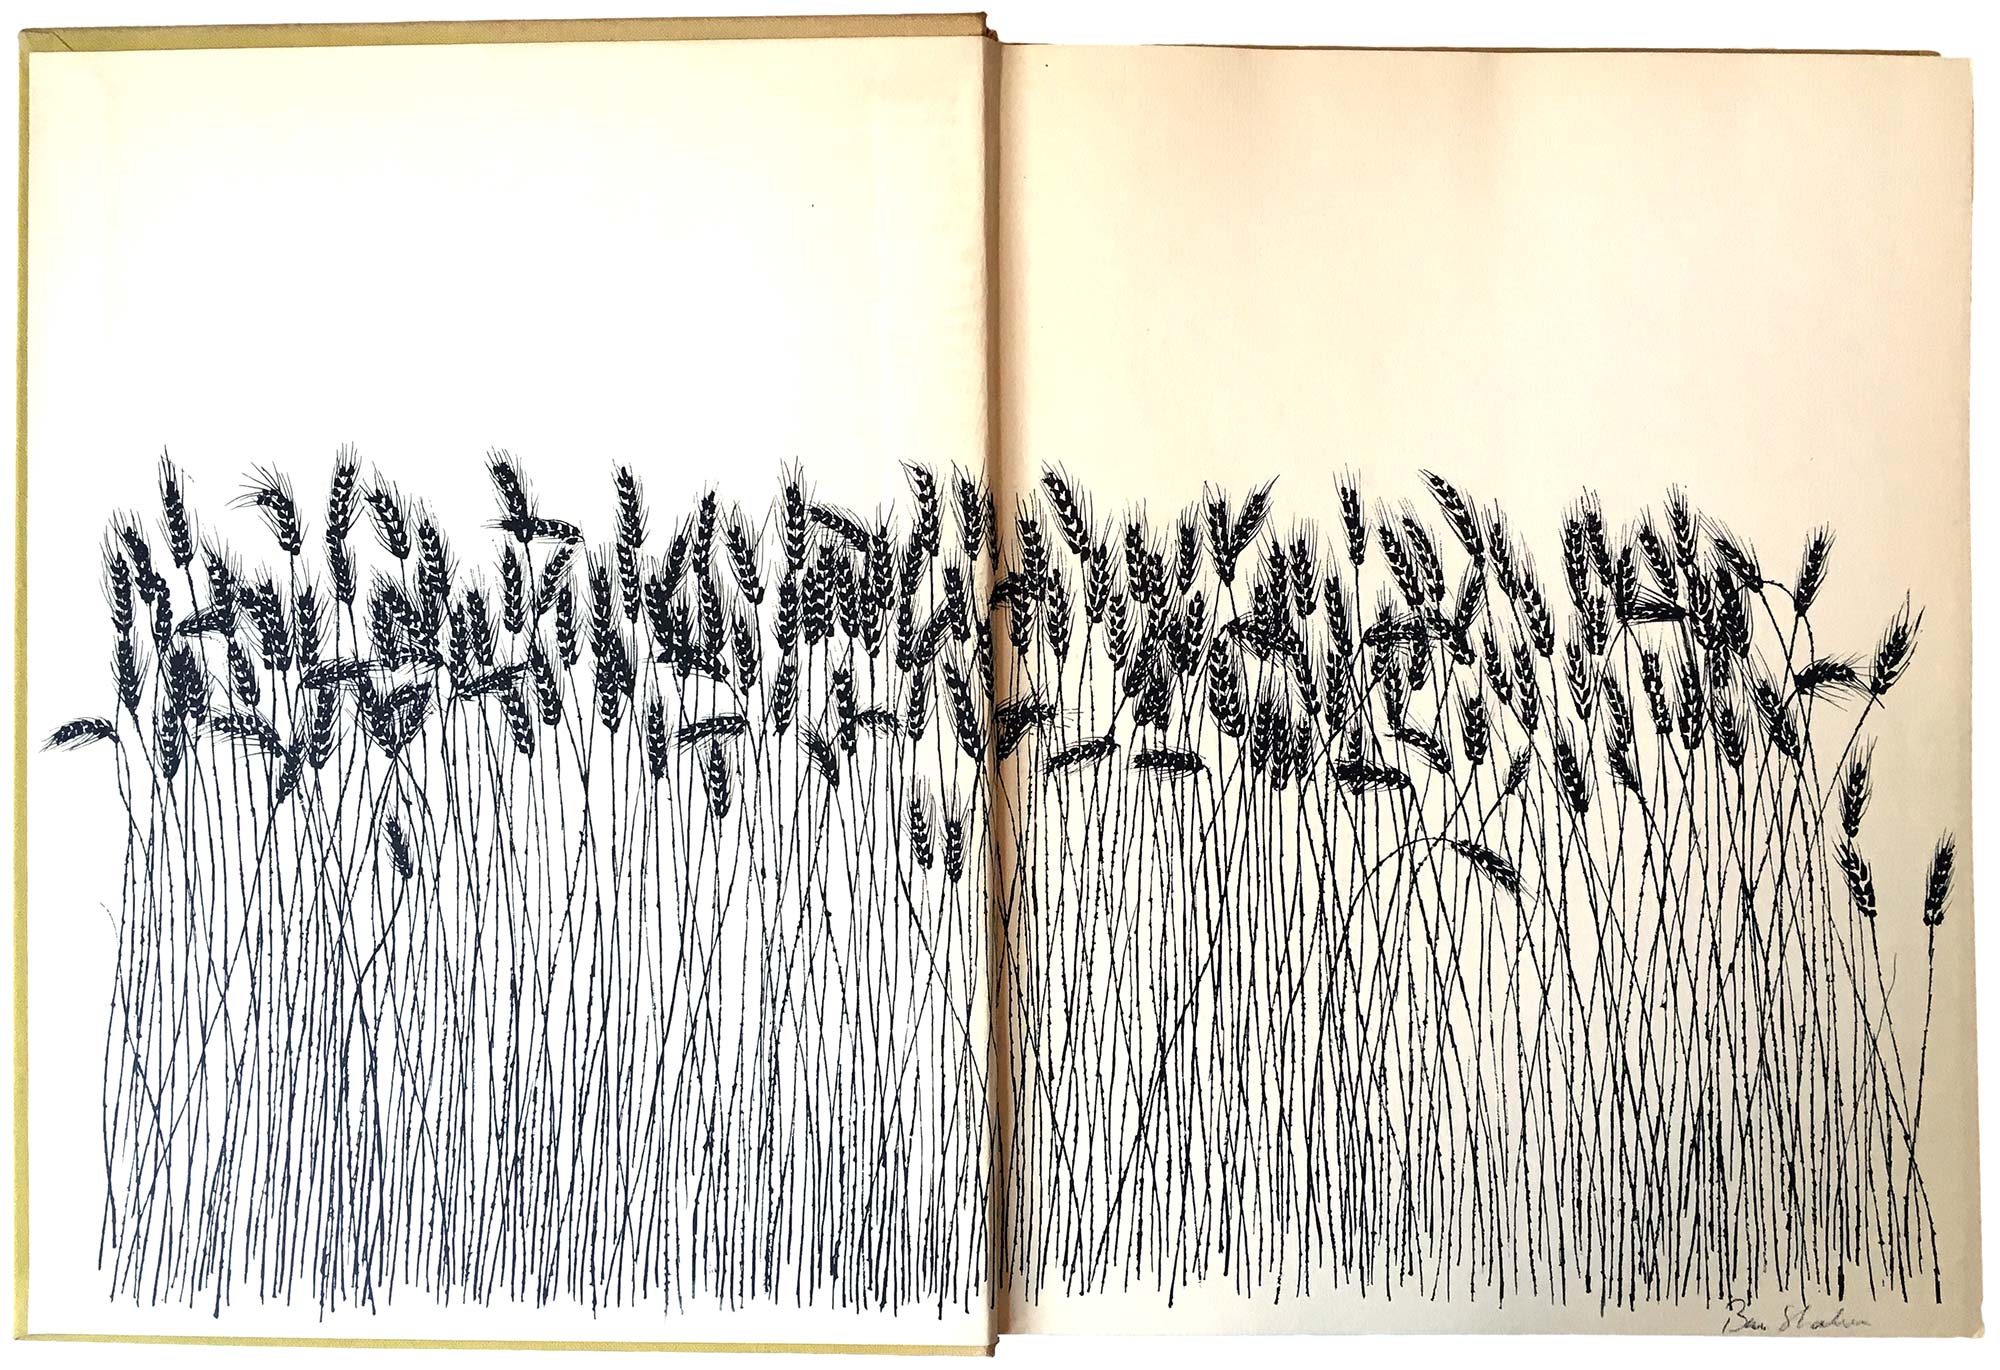 Soby_ShahnGraphic_endpapers